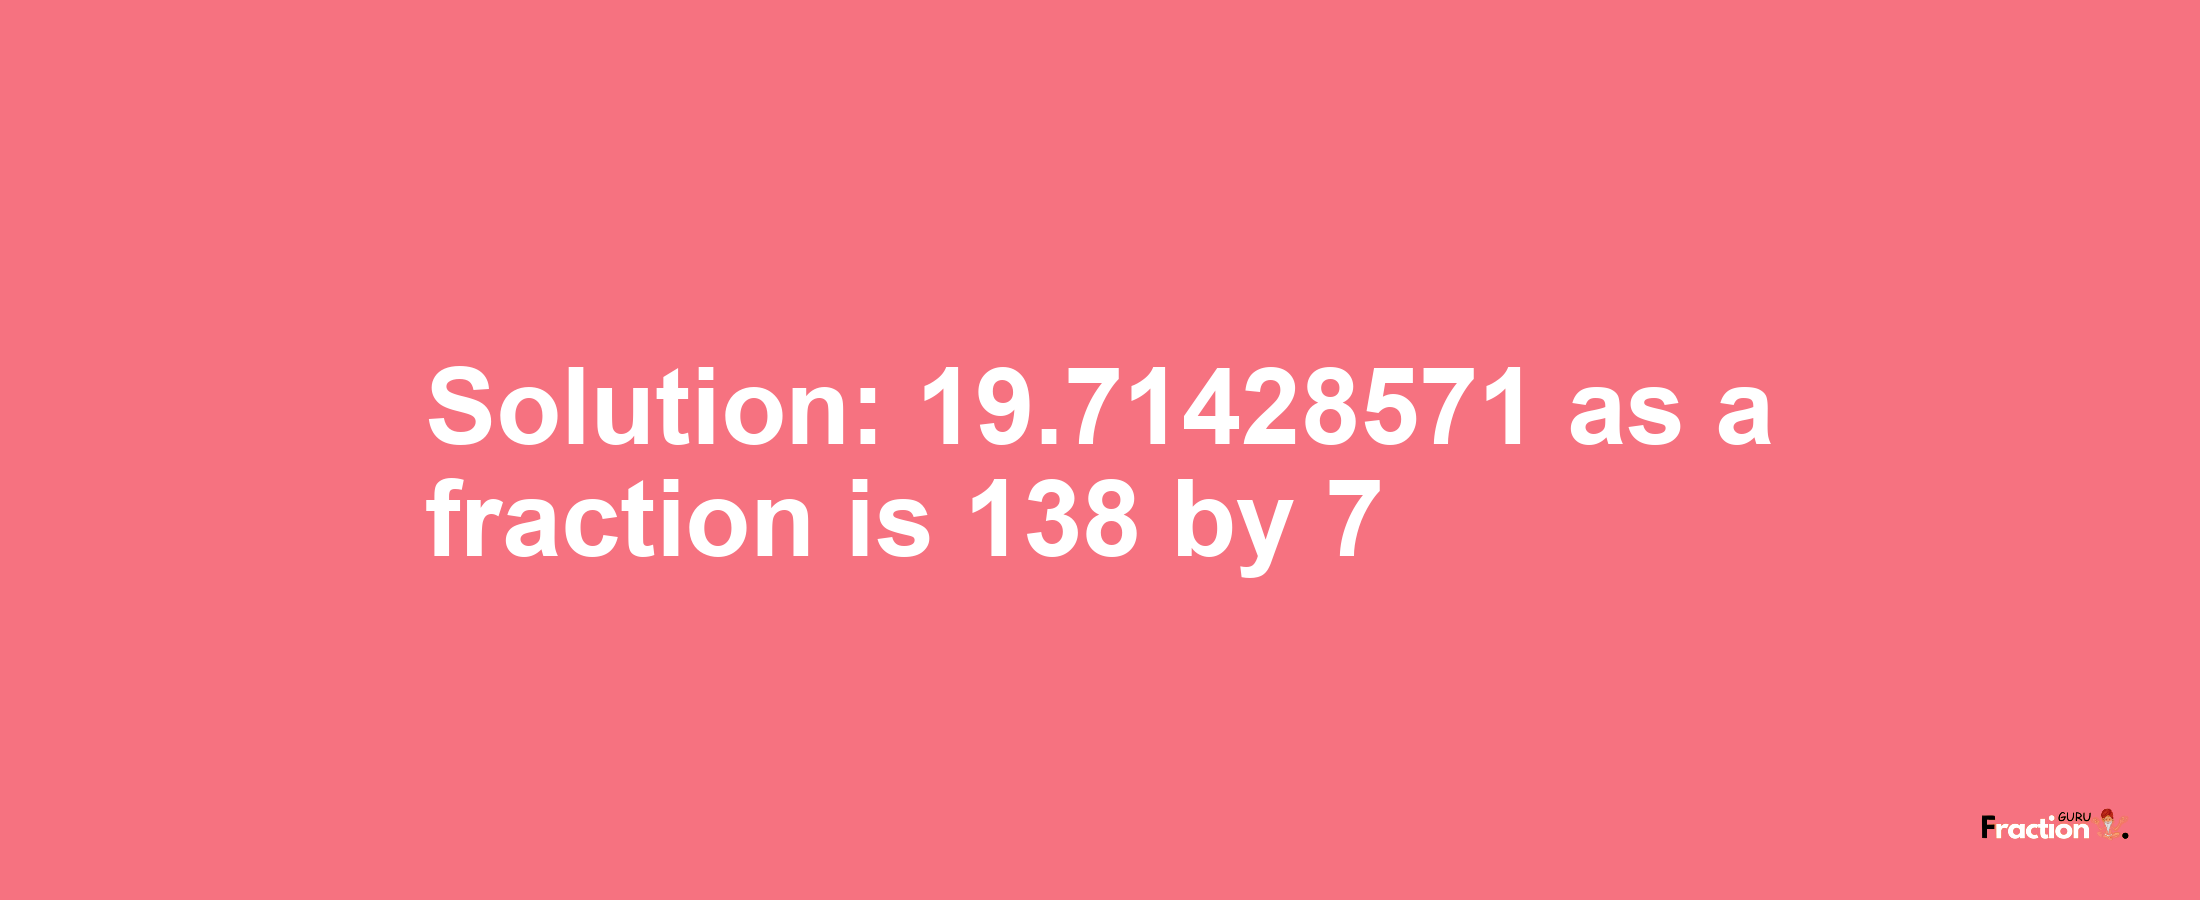 Solution:19.71428571 as a fraction is 138/7